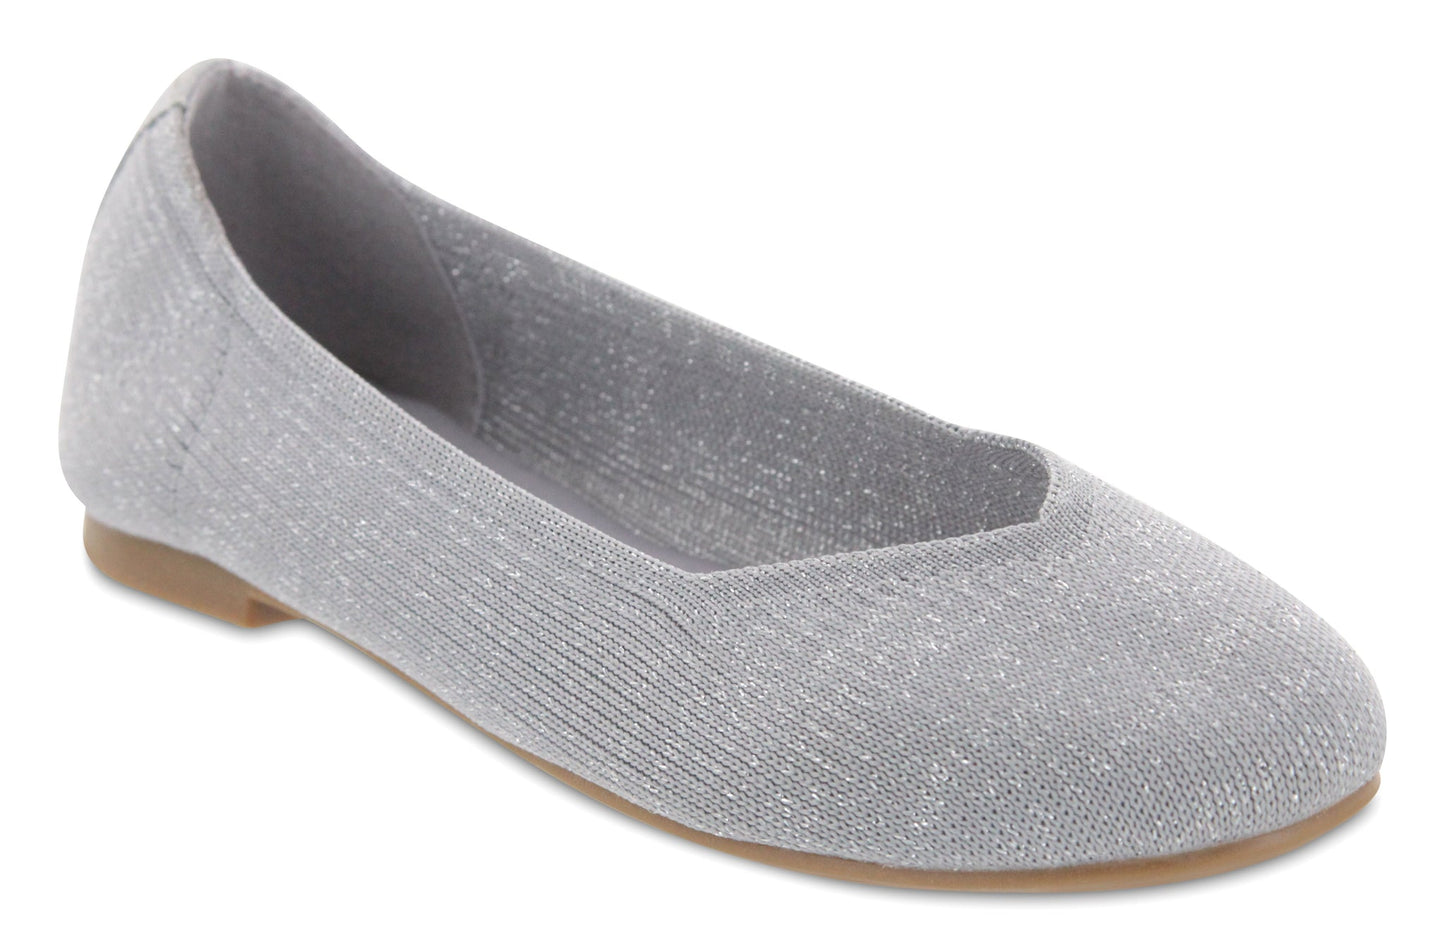 Girl's MIA Kids, Kandi Flat - Little Kid & Big Kid. These cute knit flats will go with everything and will be a versatile option for her. She will love the soft, stretchy uppers and dressy look.  Manmade knit fabric uppers Slip-on style Fabric linings Lightly padded contour footbed Manmade outsole